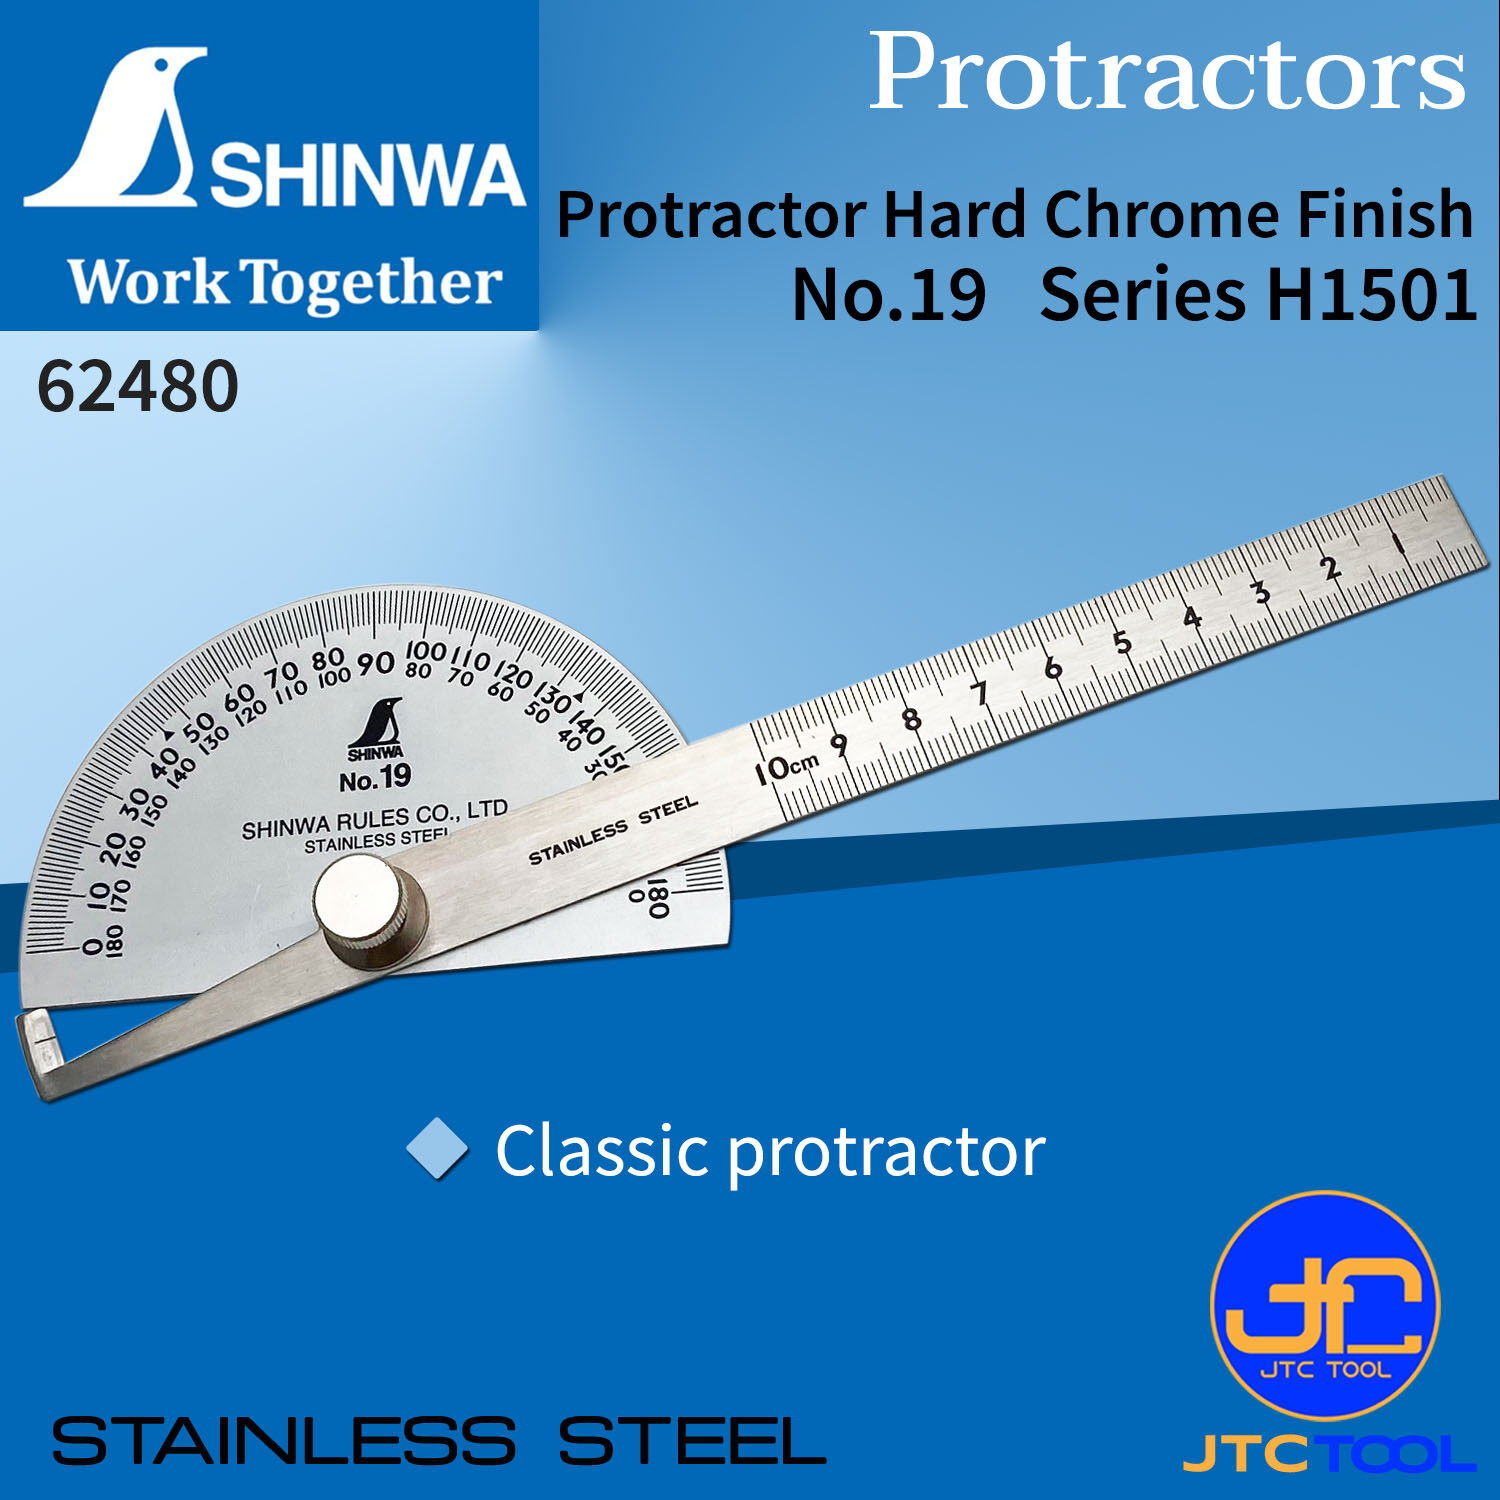 Shinwa ครึ่งวงกลมวัดองศา - Stainless Steel Protractor No.62480